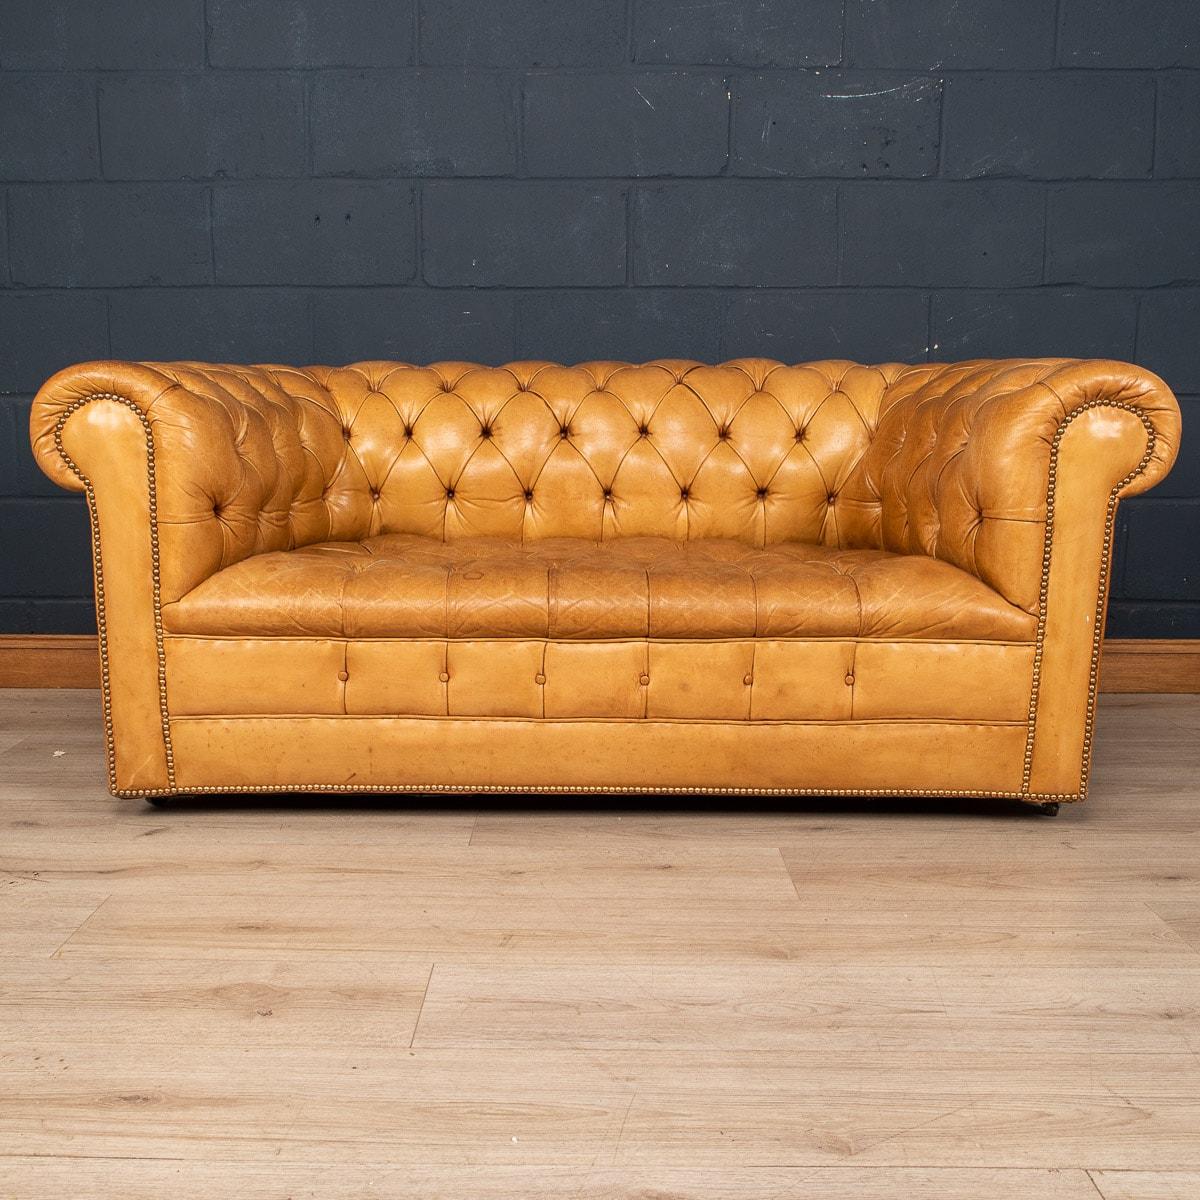 A superb Mid-20th Century leather chesterfield sofa. One of the most elegant models with button down seating, this is a fashionable item of furniture capable of uplifting the interior space of any contemporary or traditional home, the classic colour